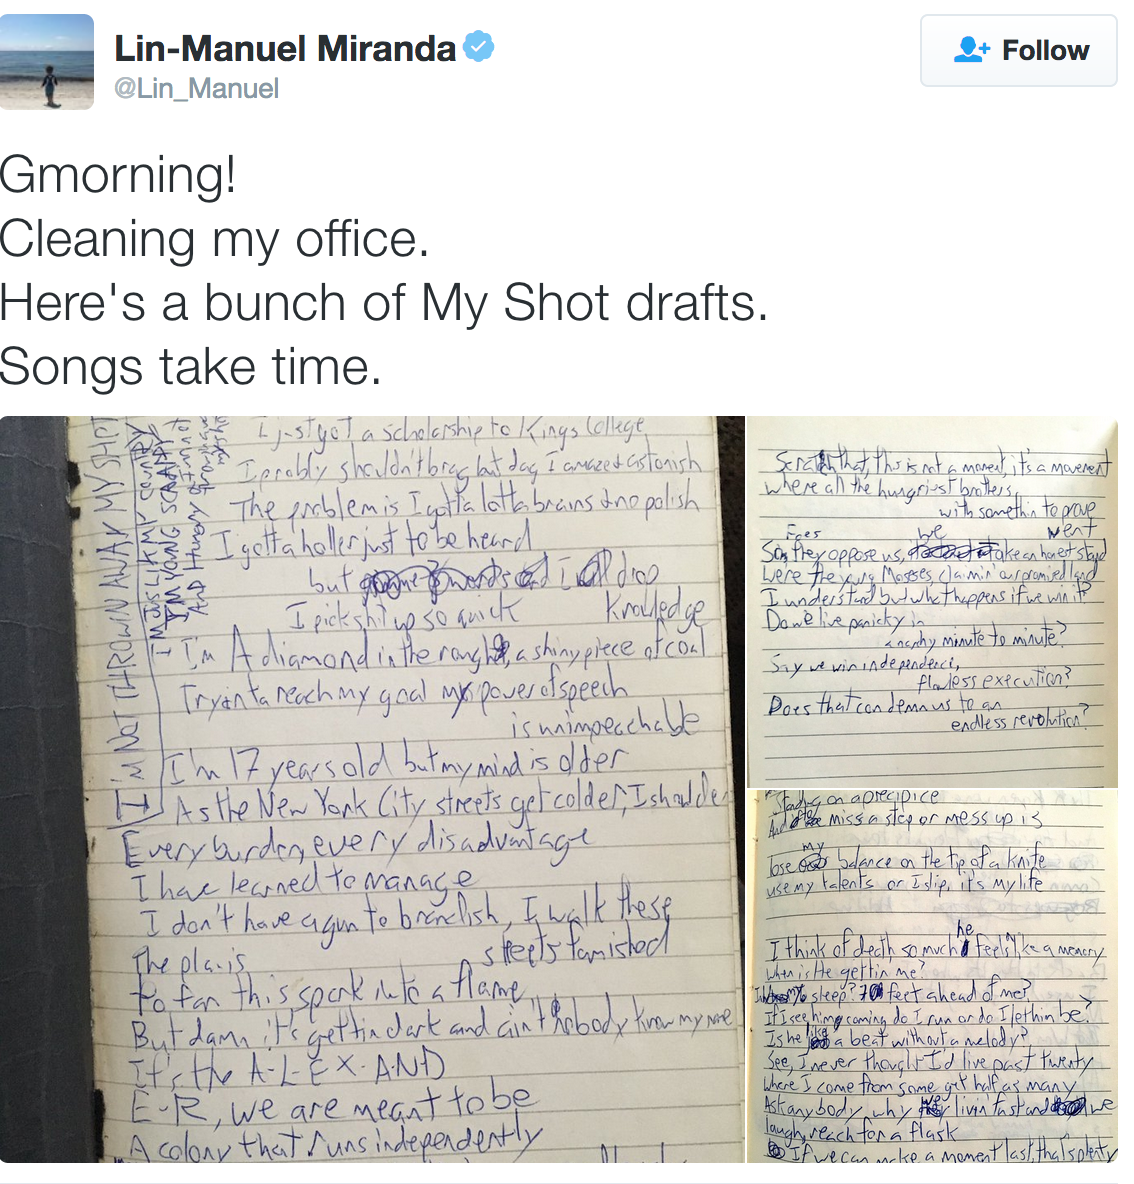 Creative process: edit in progress. Lin-Manuel Miranda's drafts for one song from his musical Hamilton